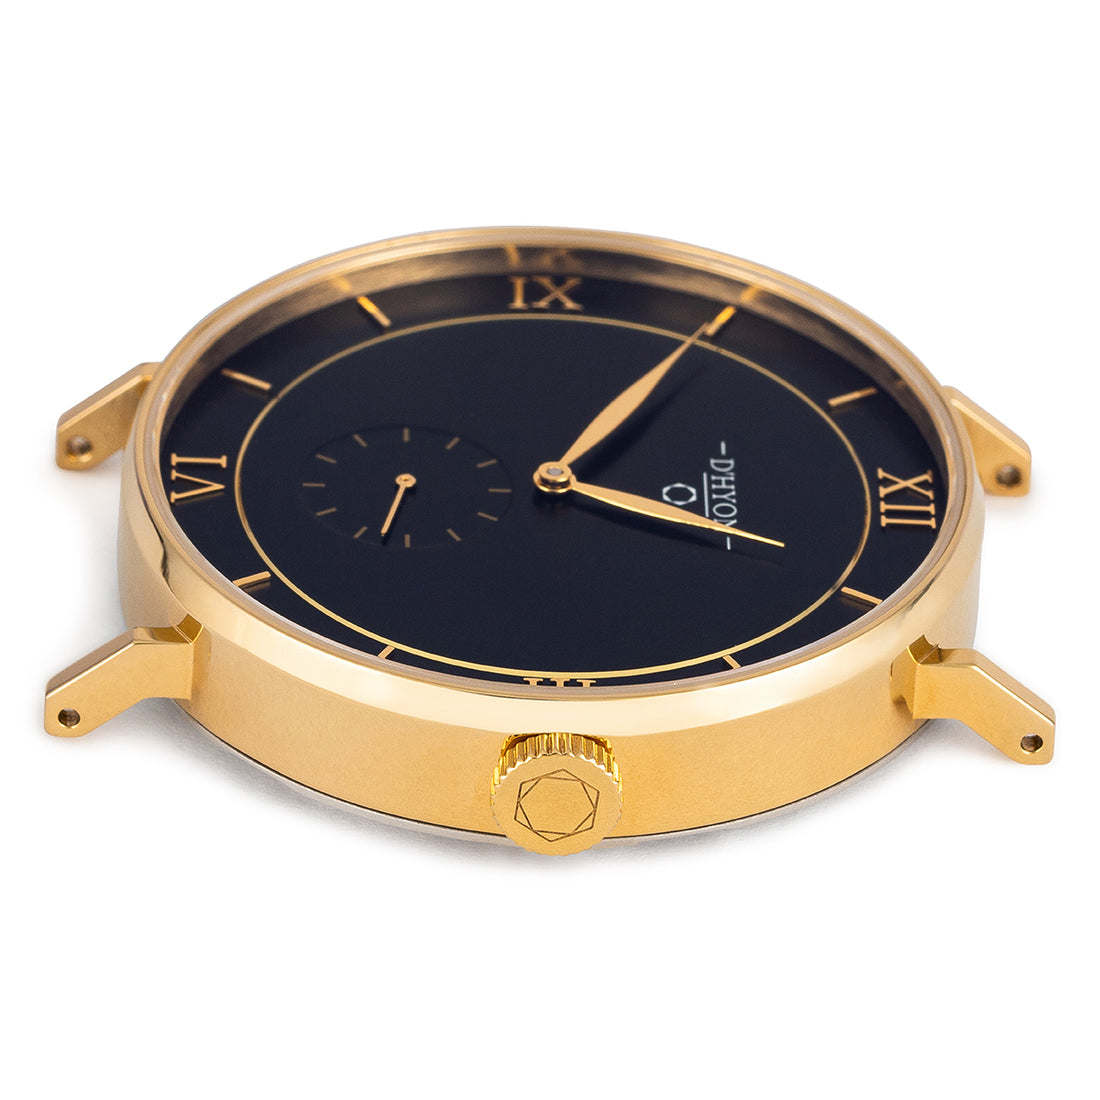 D'HYON Watches: Redefining Affordability in Timepieces